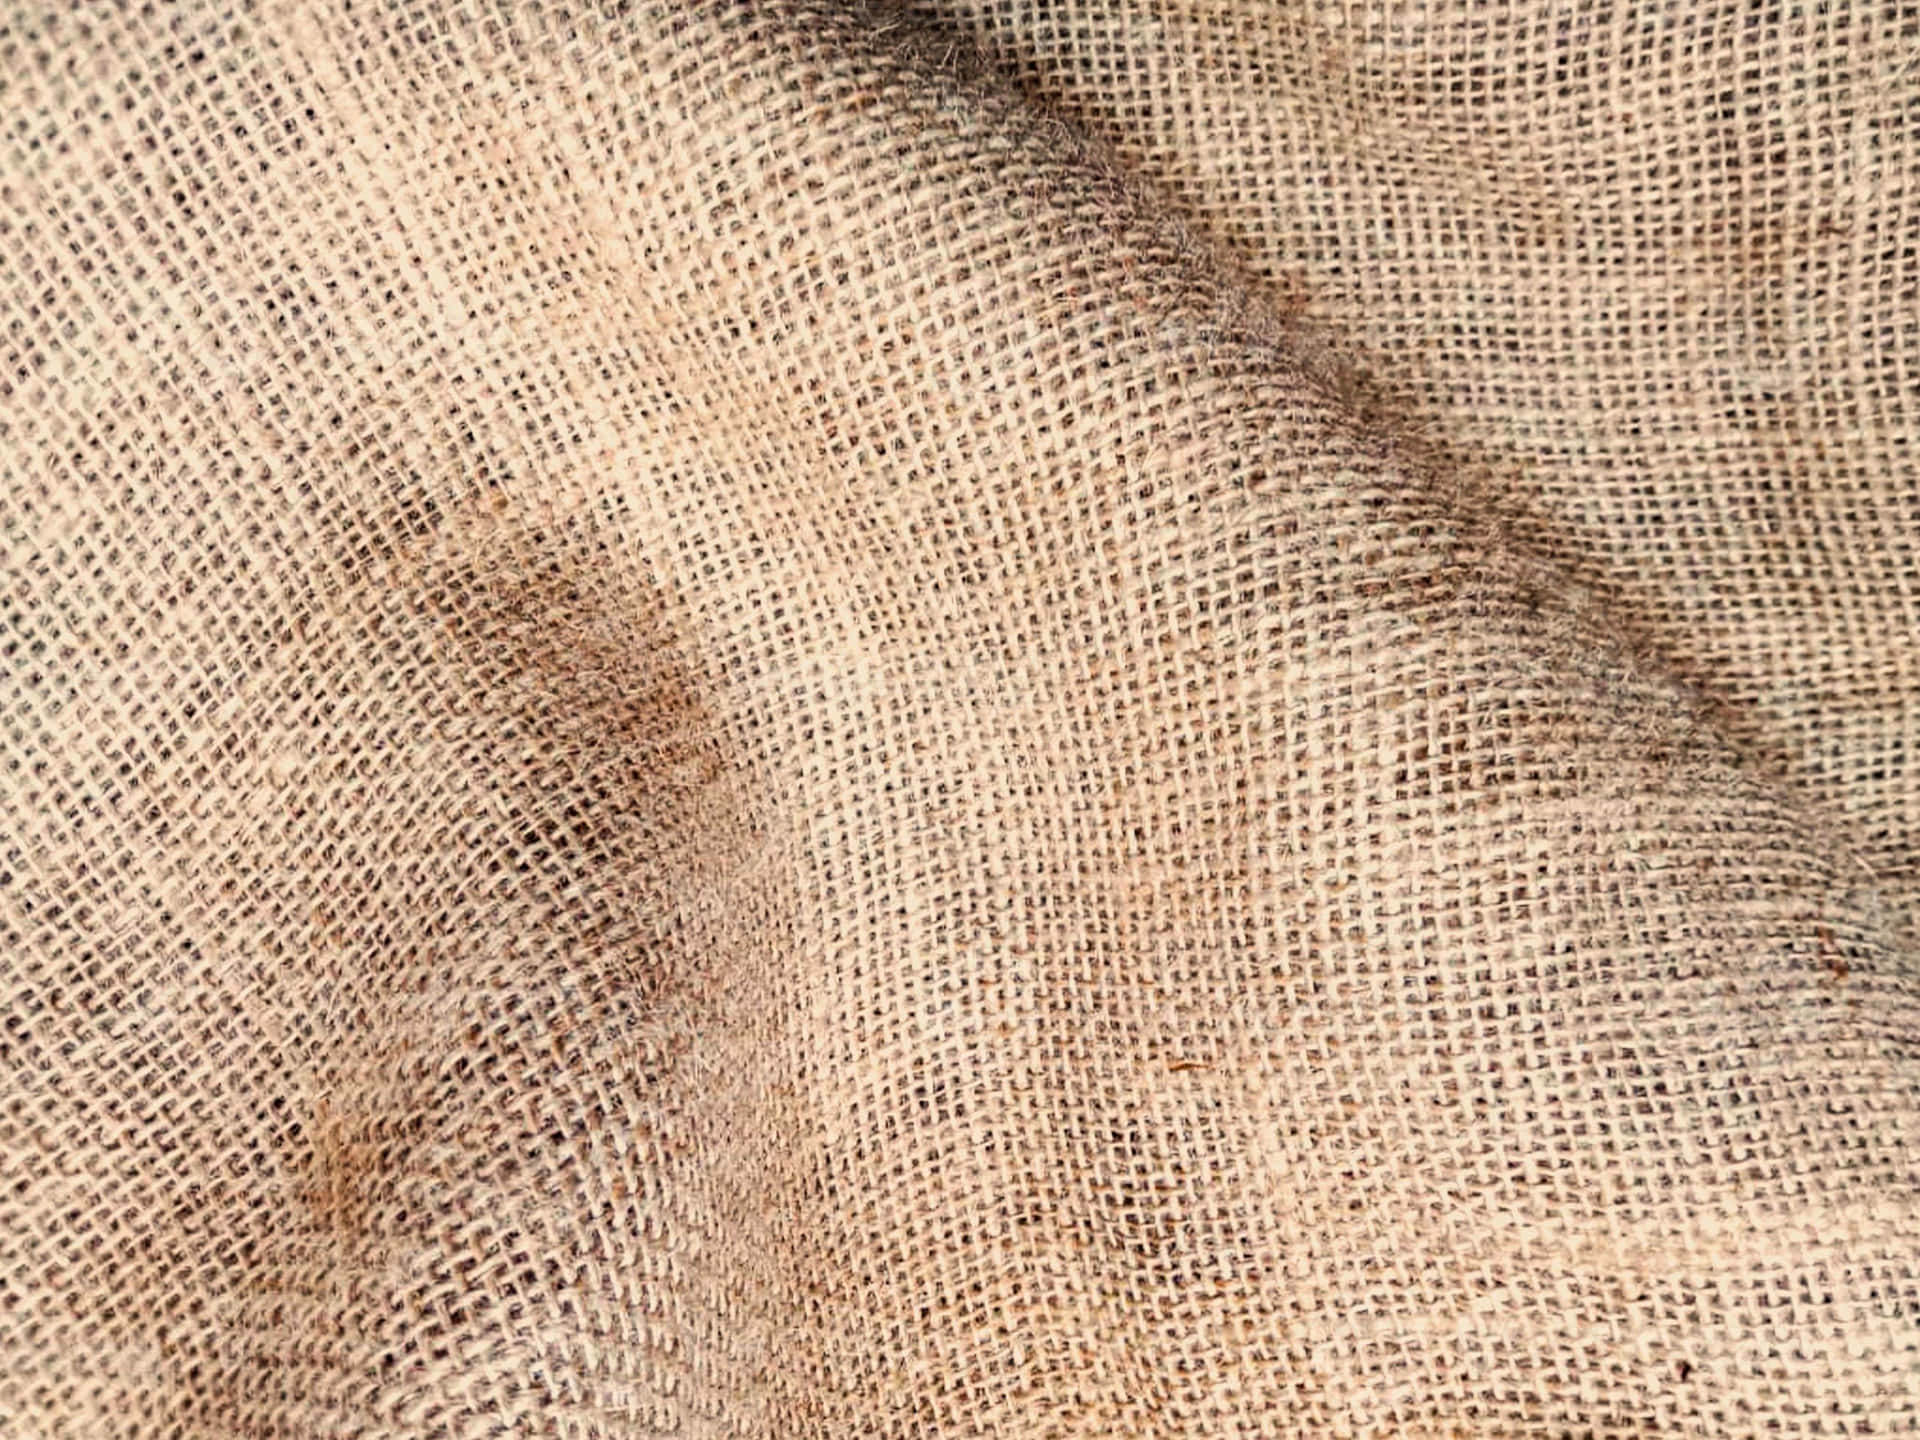 Burlap fabric background with an aged, weathered look